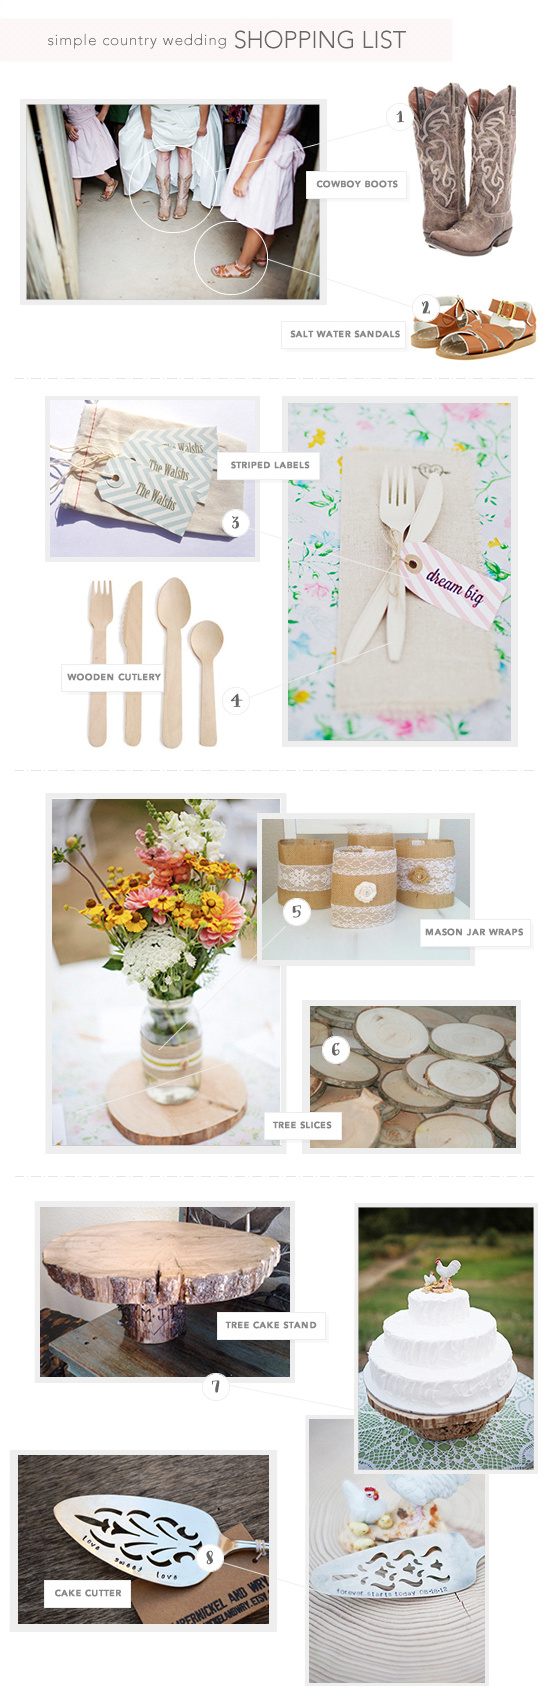 Shopping List For A Simple Country Wedding